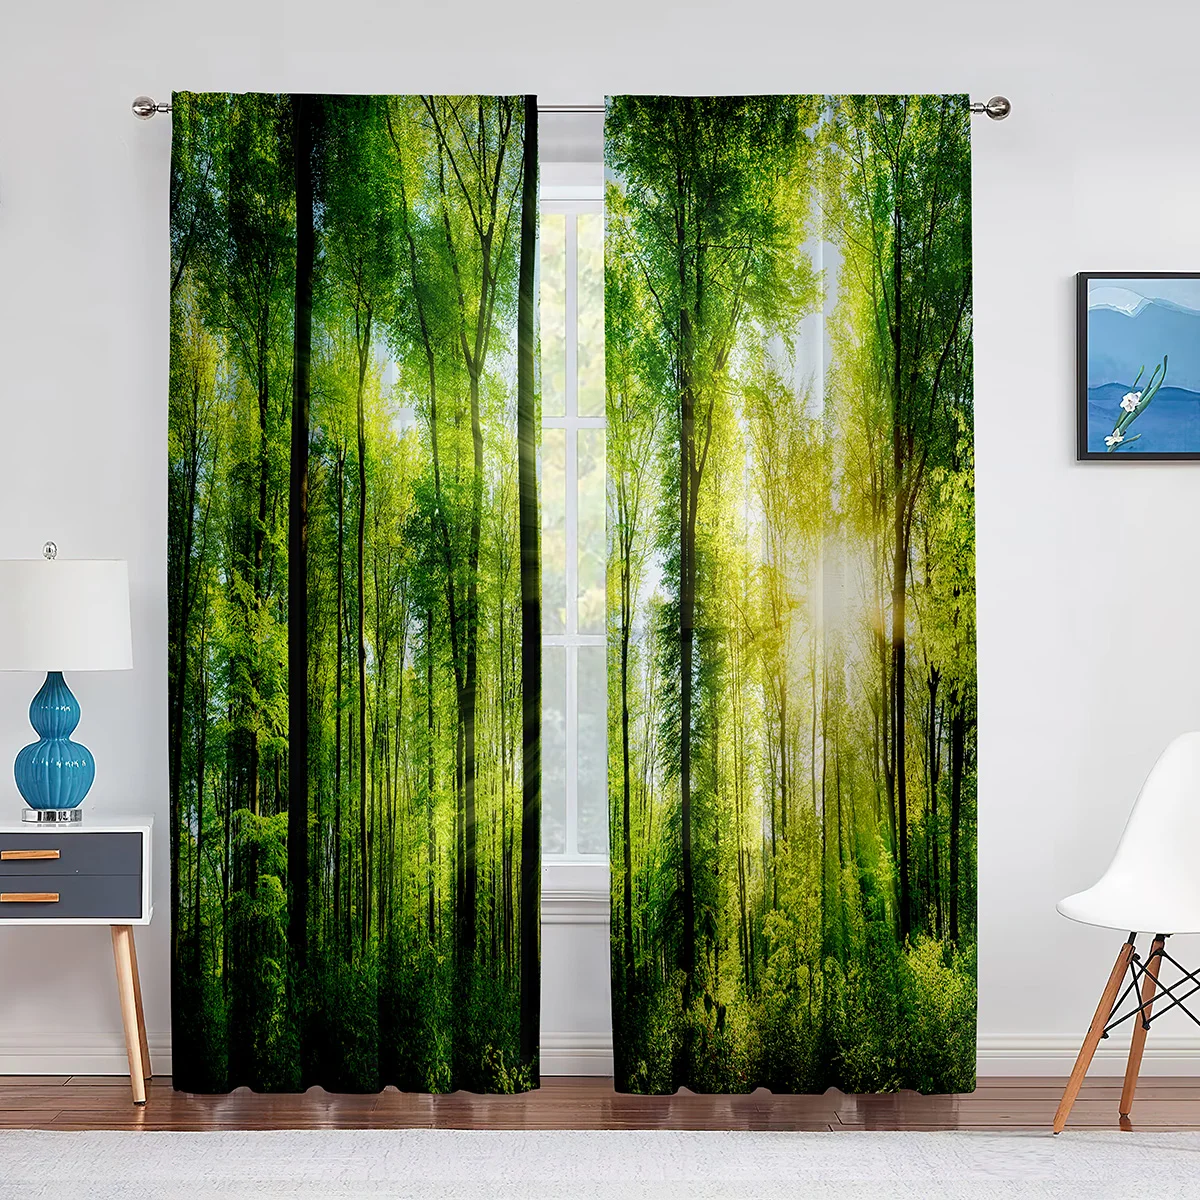 Woodland Forest Foliage Sunbeams Nature View Tulle Curtains for Living Room Bedroom Kitchen Decor Sheer Voile Curtains Window